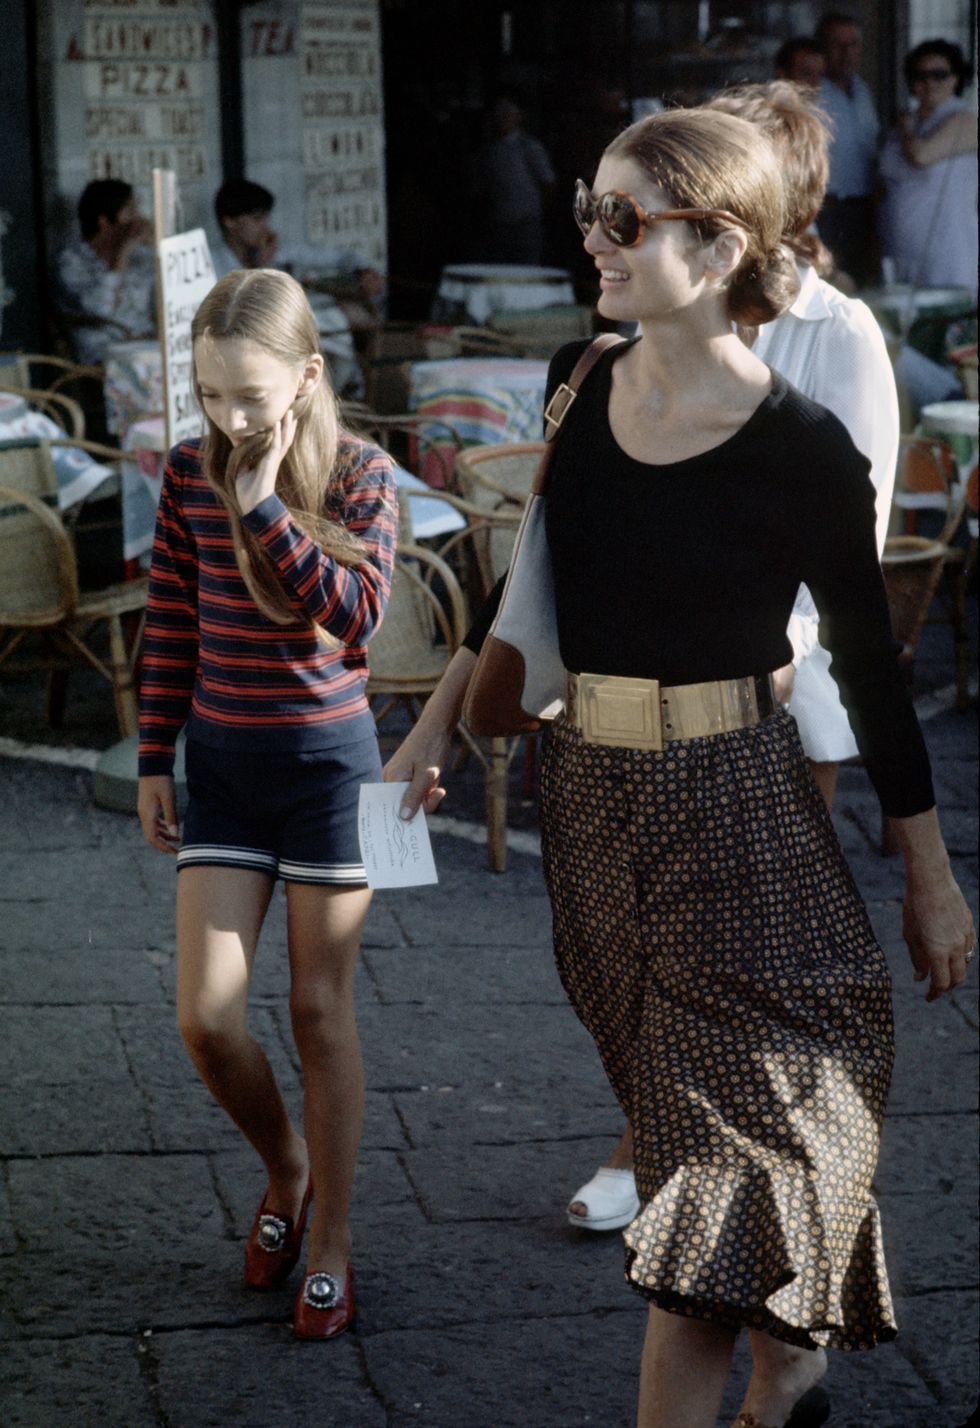 jackie kennedy and family shopping in capri august 24, 1970